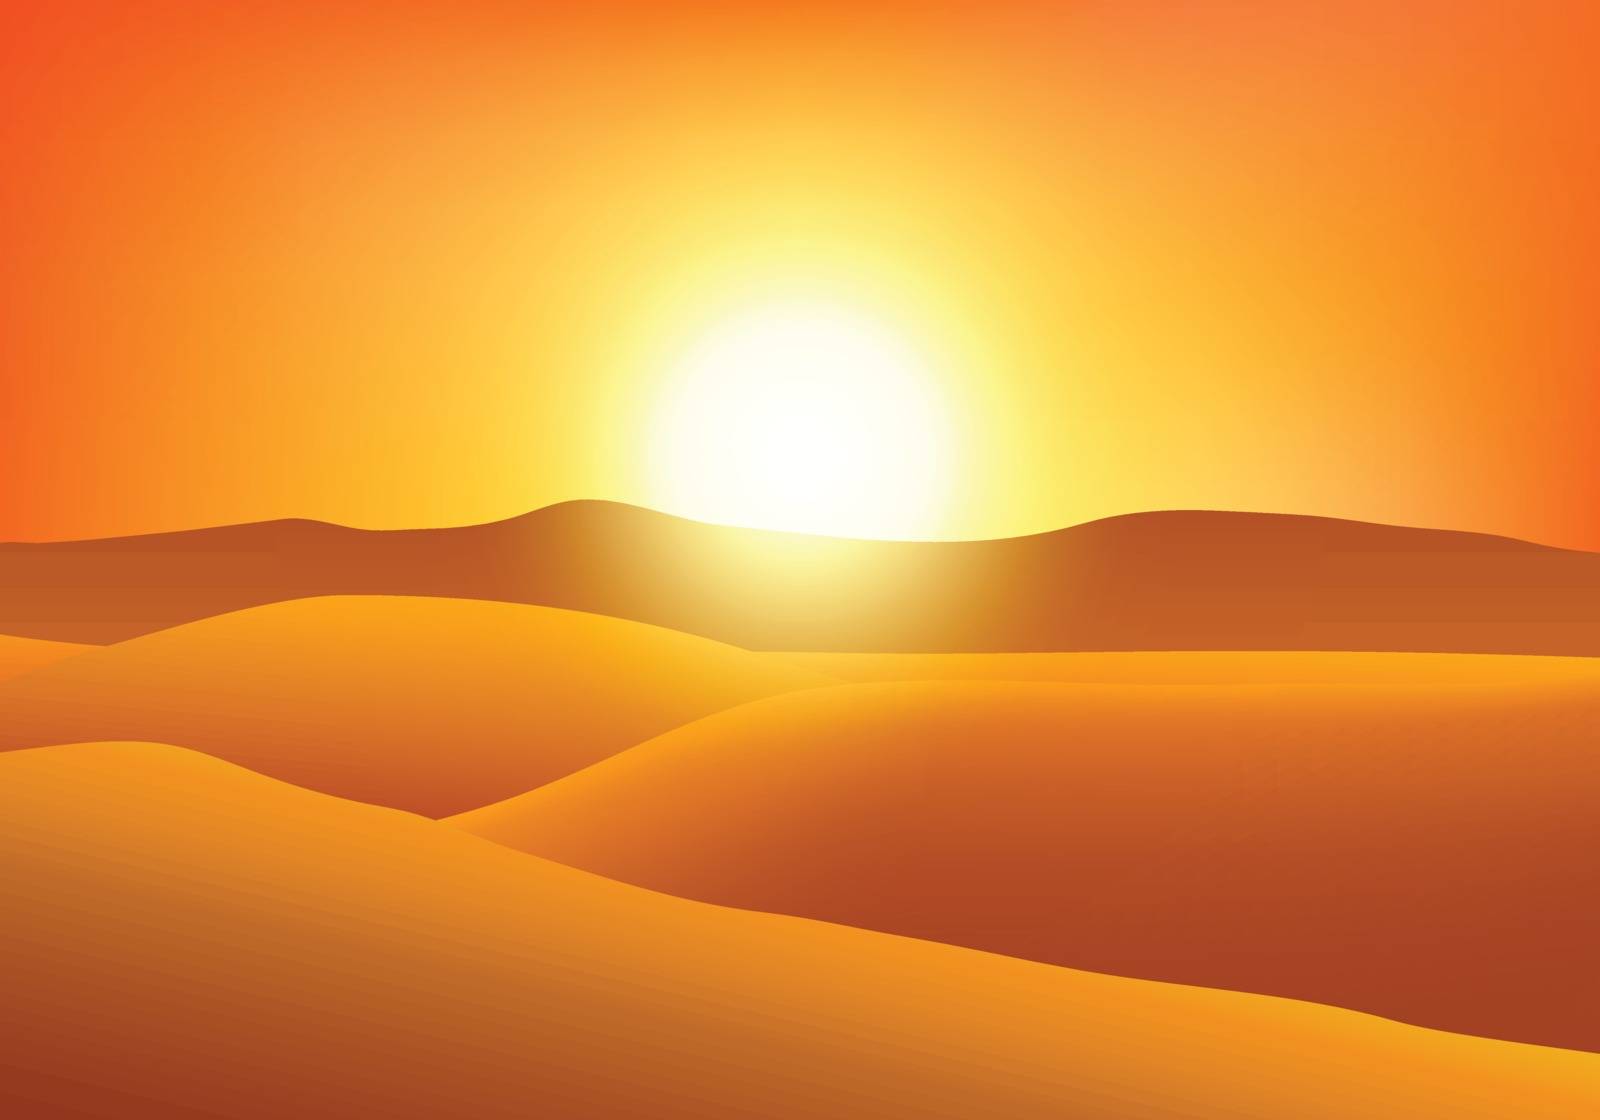 Desert at sunset with sand dunes, mountains in the background. Summer design in lush lava colors.